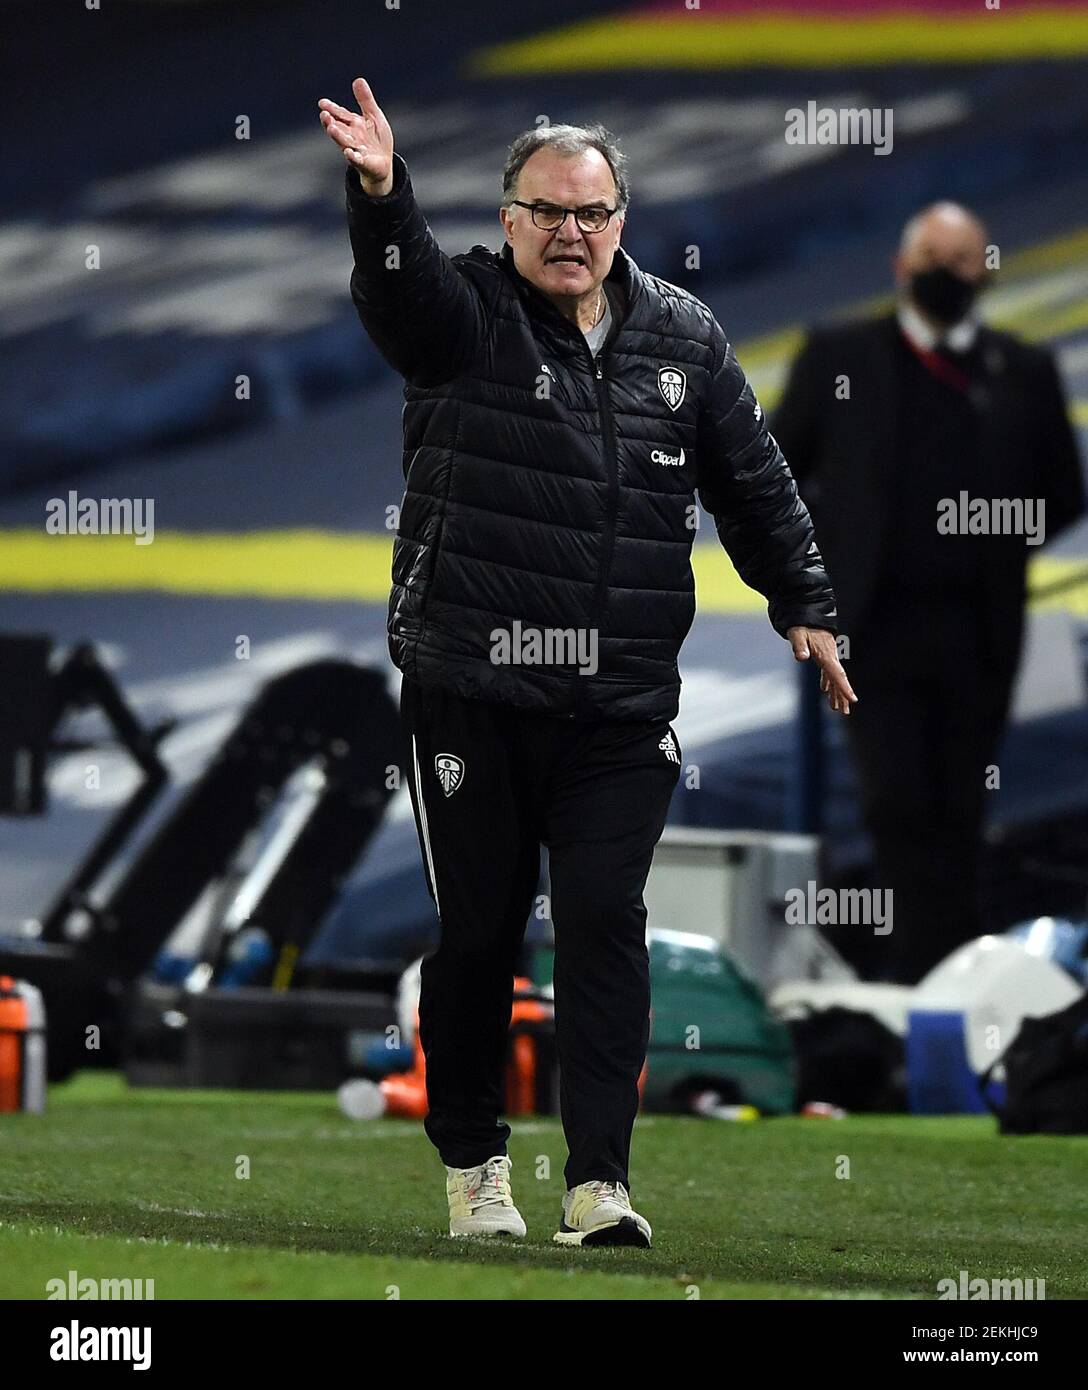 Leeds United manager Marcelo Bielsa on the touchline during the Premier League match at Elland Road, Leeds. Picture date: Tuesday February 23, 2021. Stock Photo